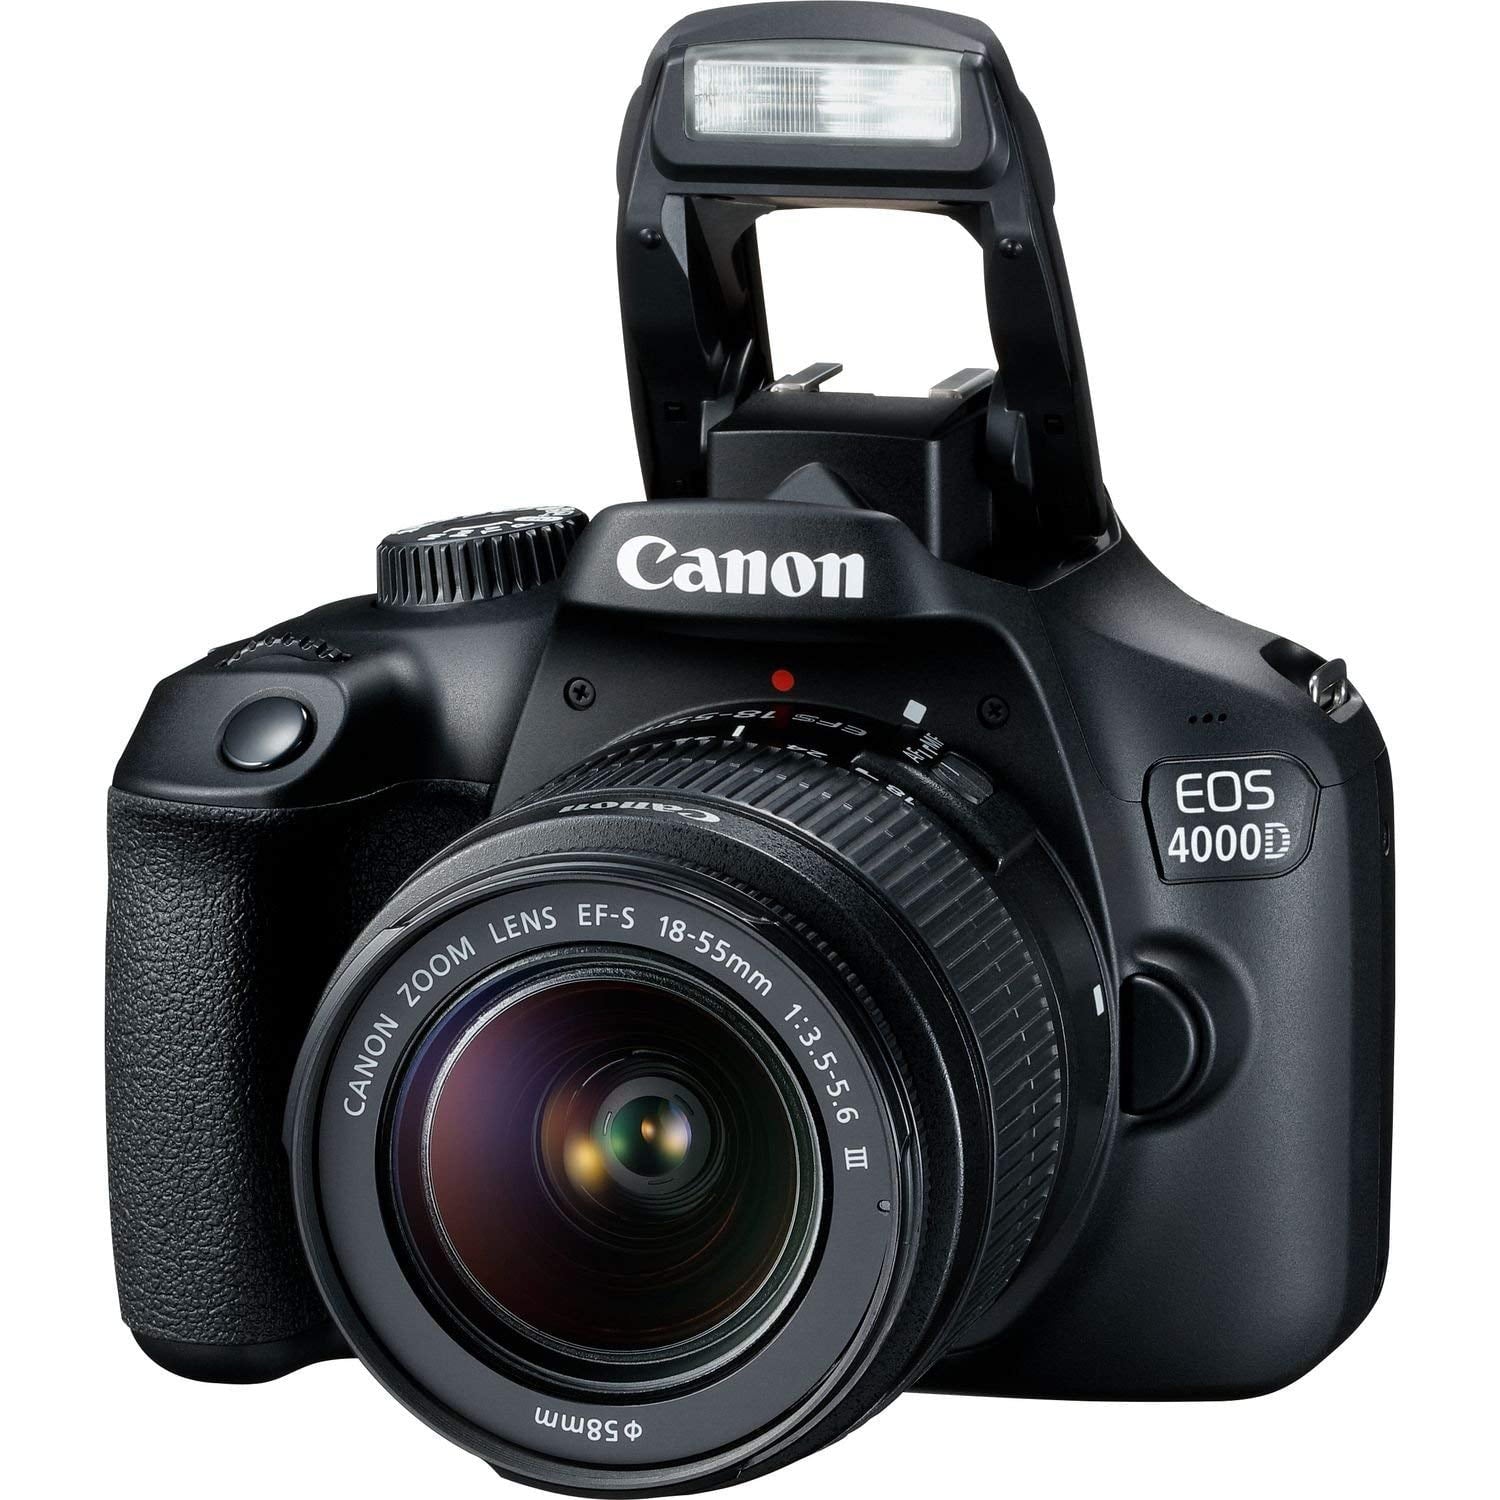 Canon EOS 4000D DSLR Camera & EF-S 18-55 mm f/3.5-5.6 IS III Lens + 75-300mm Telephoto Zoom Lens + 64GB Memory Card + Camera Bag